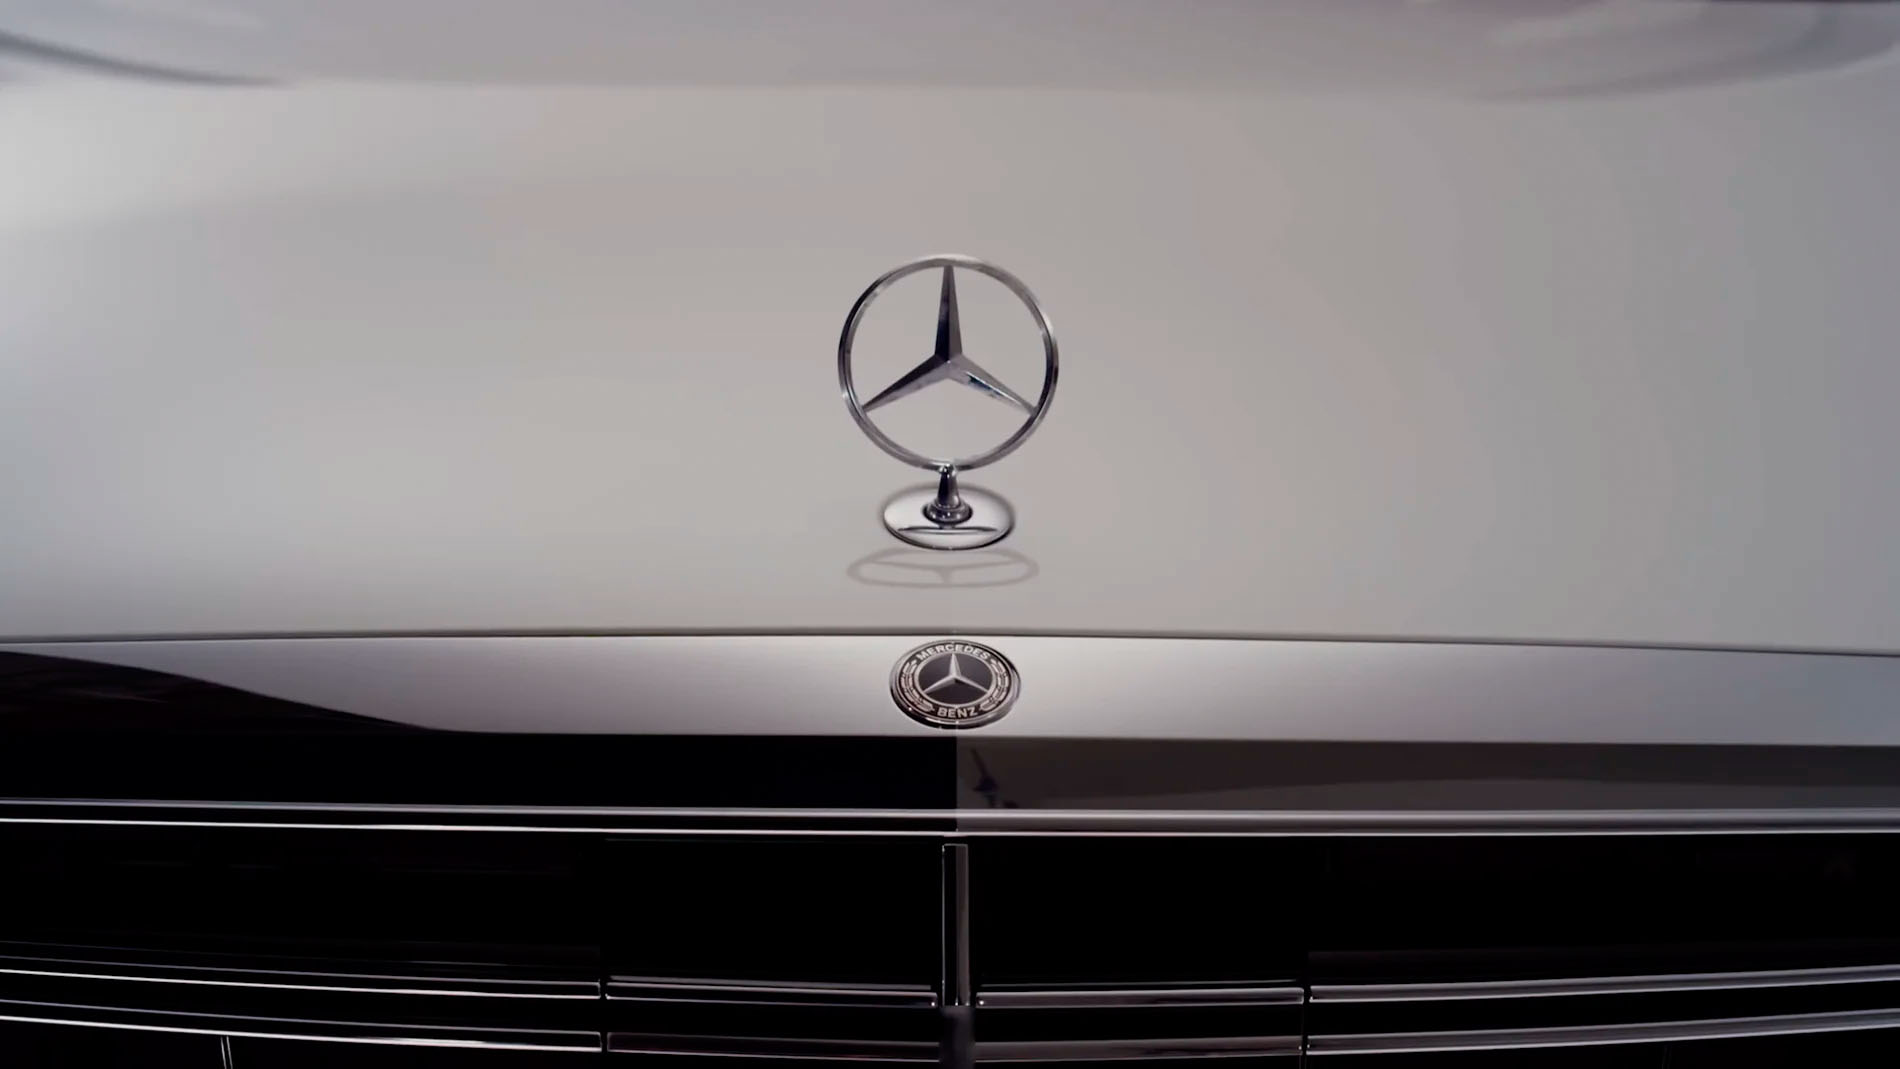 Advertising Product Film of Mercedes S500